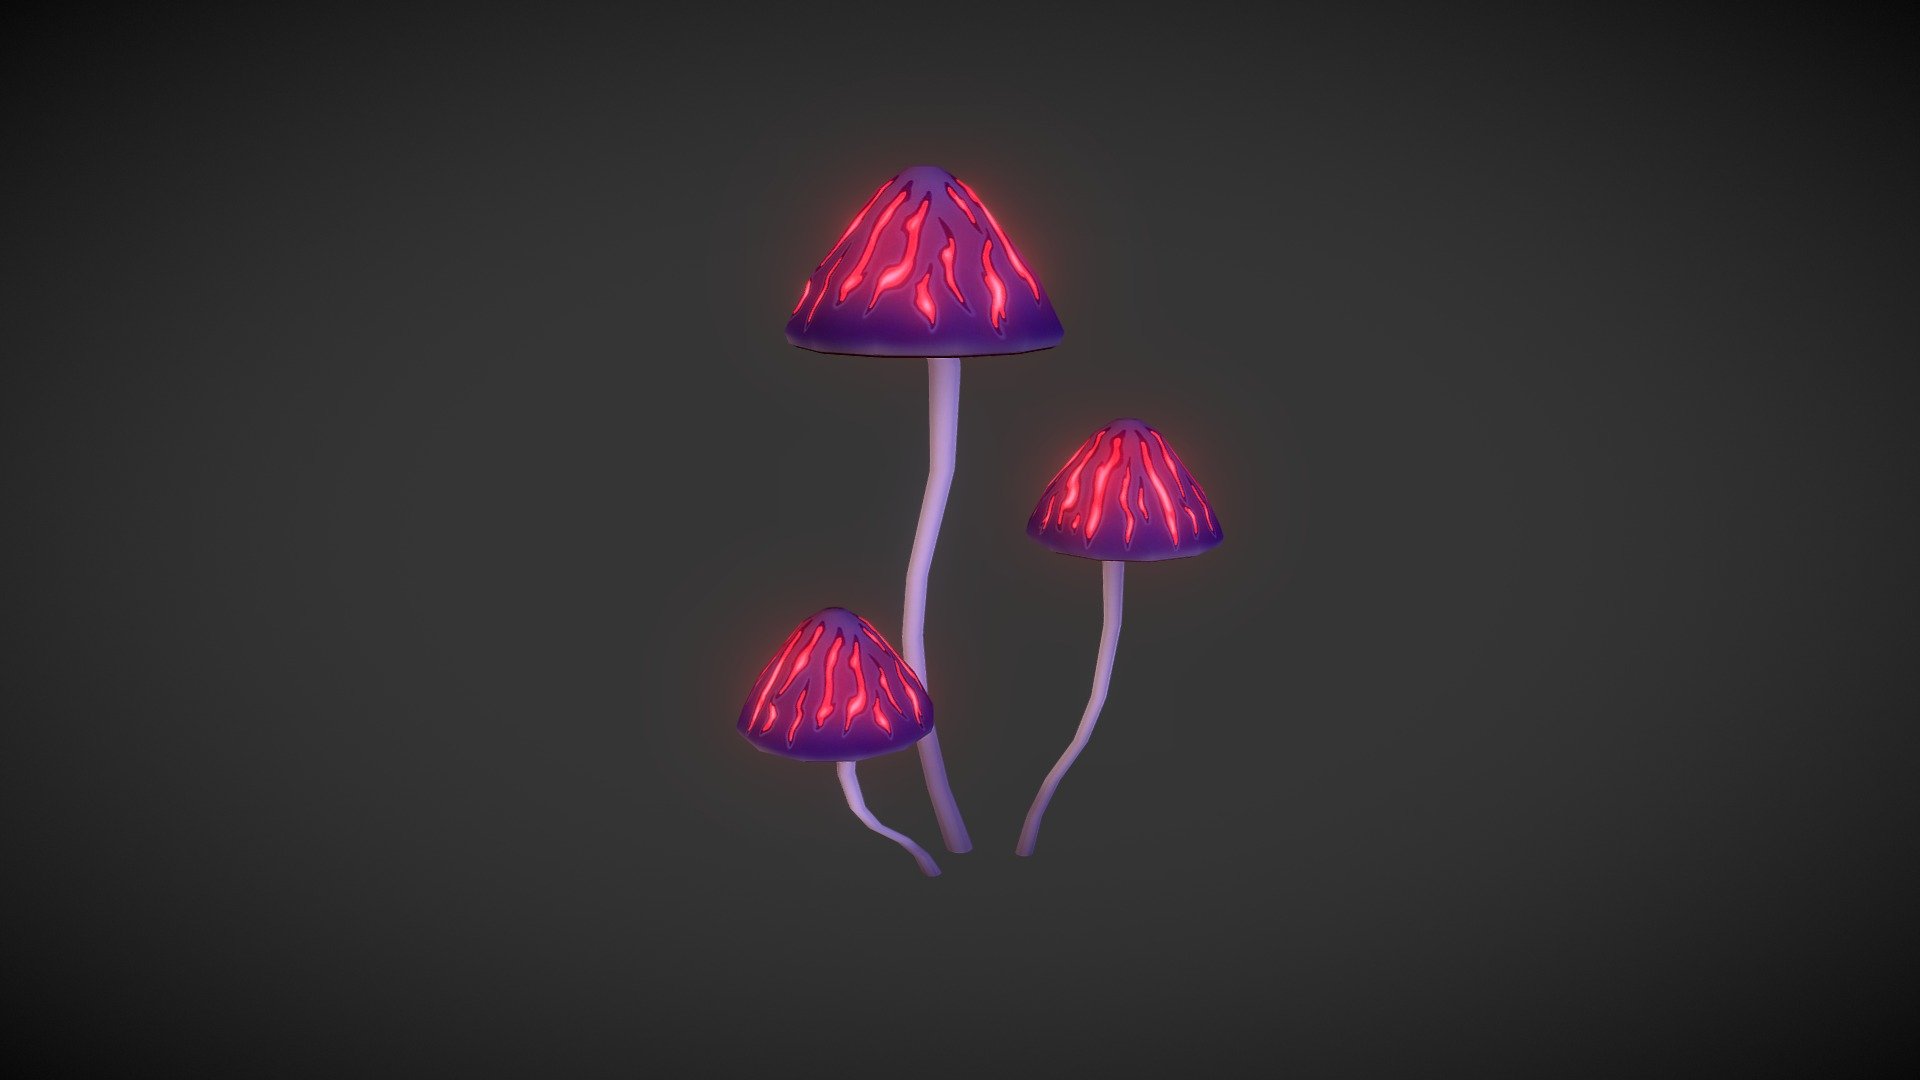 A random mushroom I made just for fun.

Magic Mushroom is modeled in blender and textured in photoshop 3d model